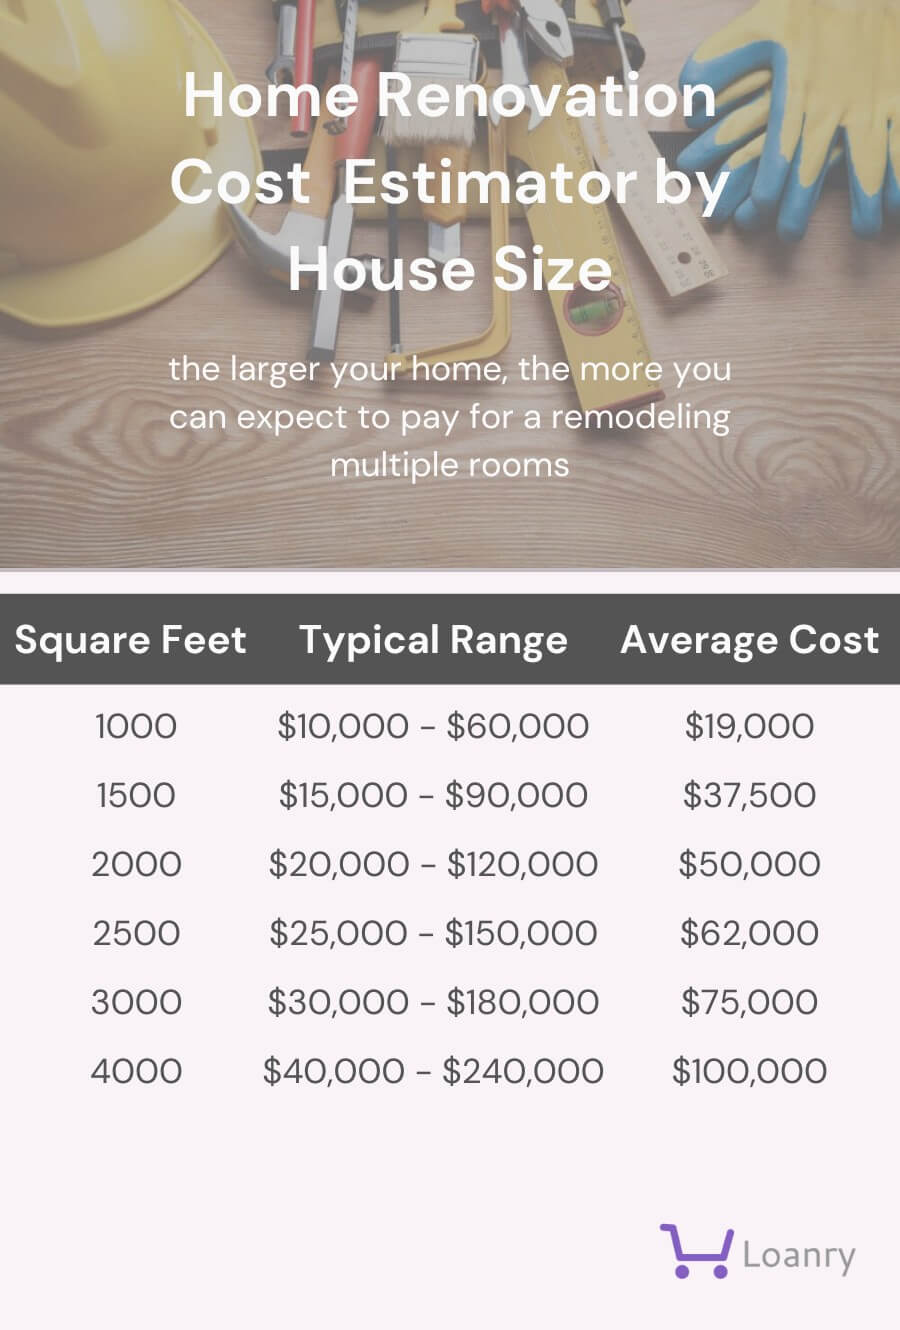 Home renovation Cost Estimator by House Size.